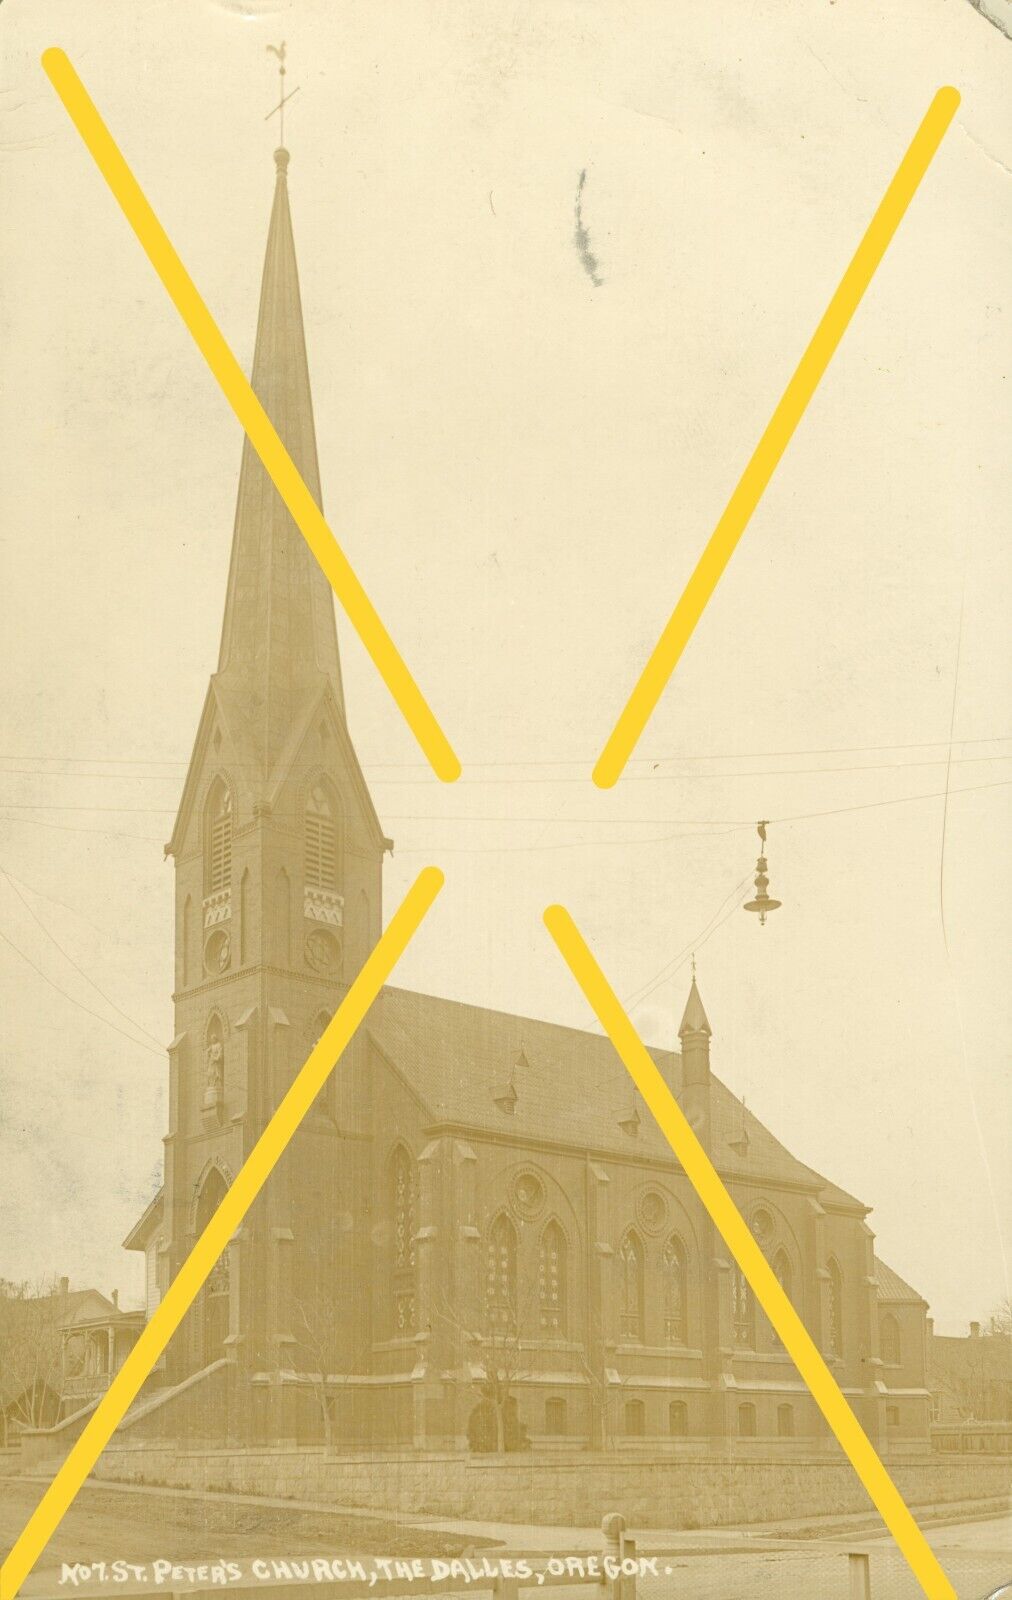 1913 No. 7 St Peters Church The Dalles Oregon Wasco County Panama Exposition